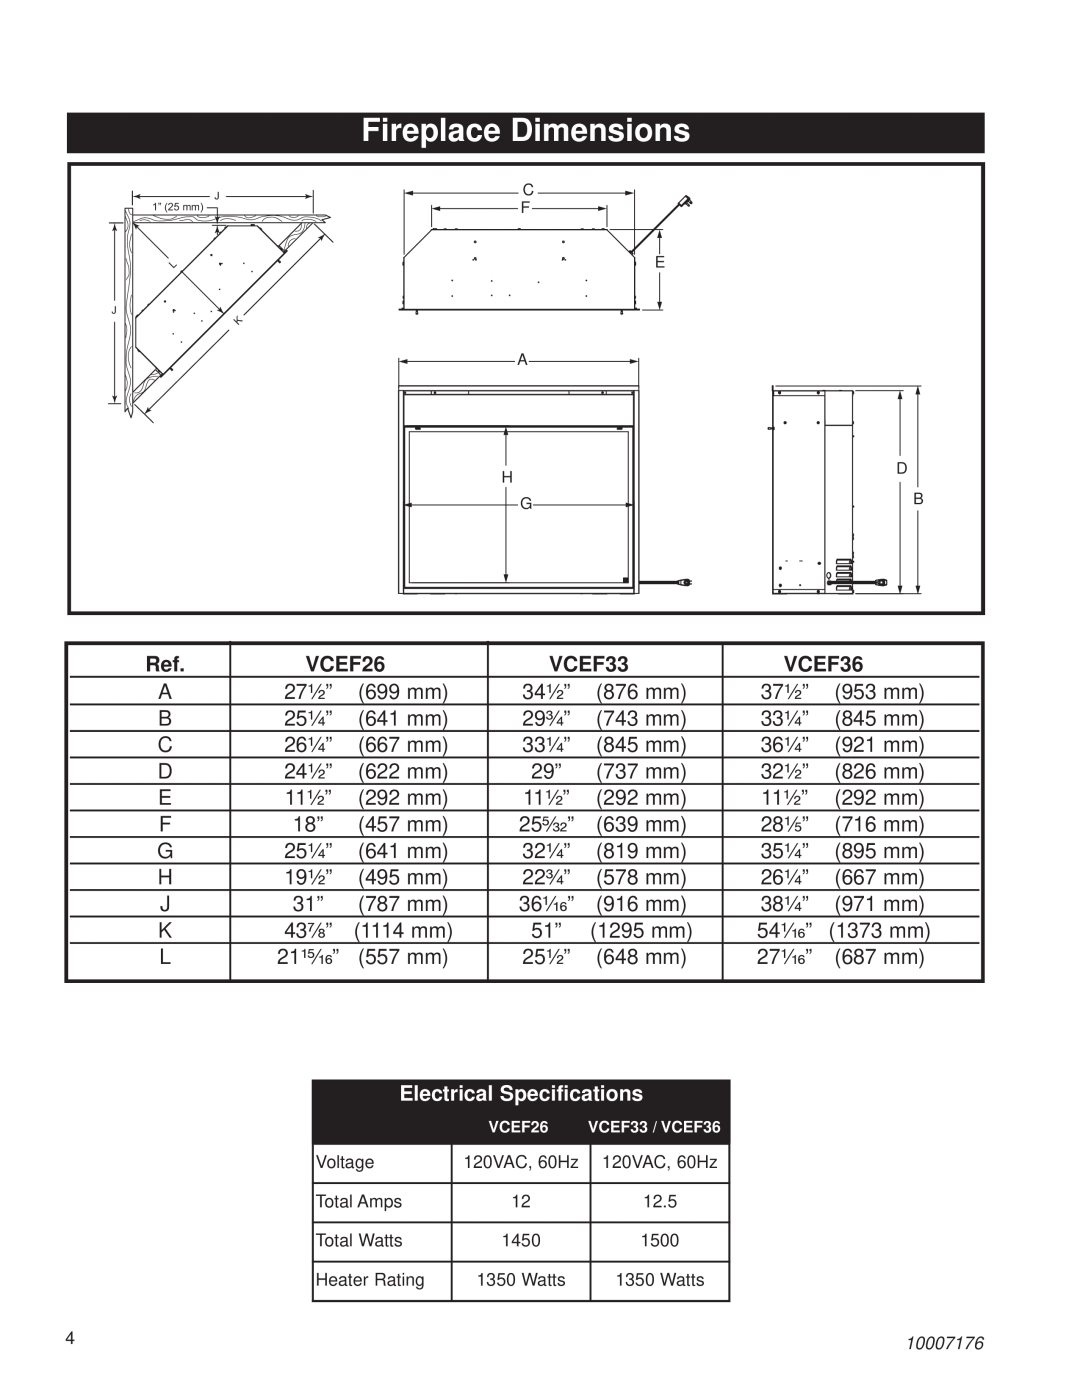 Vermont Casting VCEF26 installation instructions Fireplace Dimensions, VCEF33, VCEF36, Electrical Specifications 